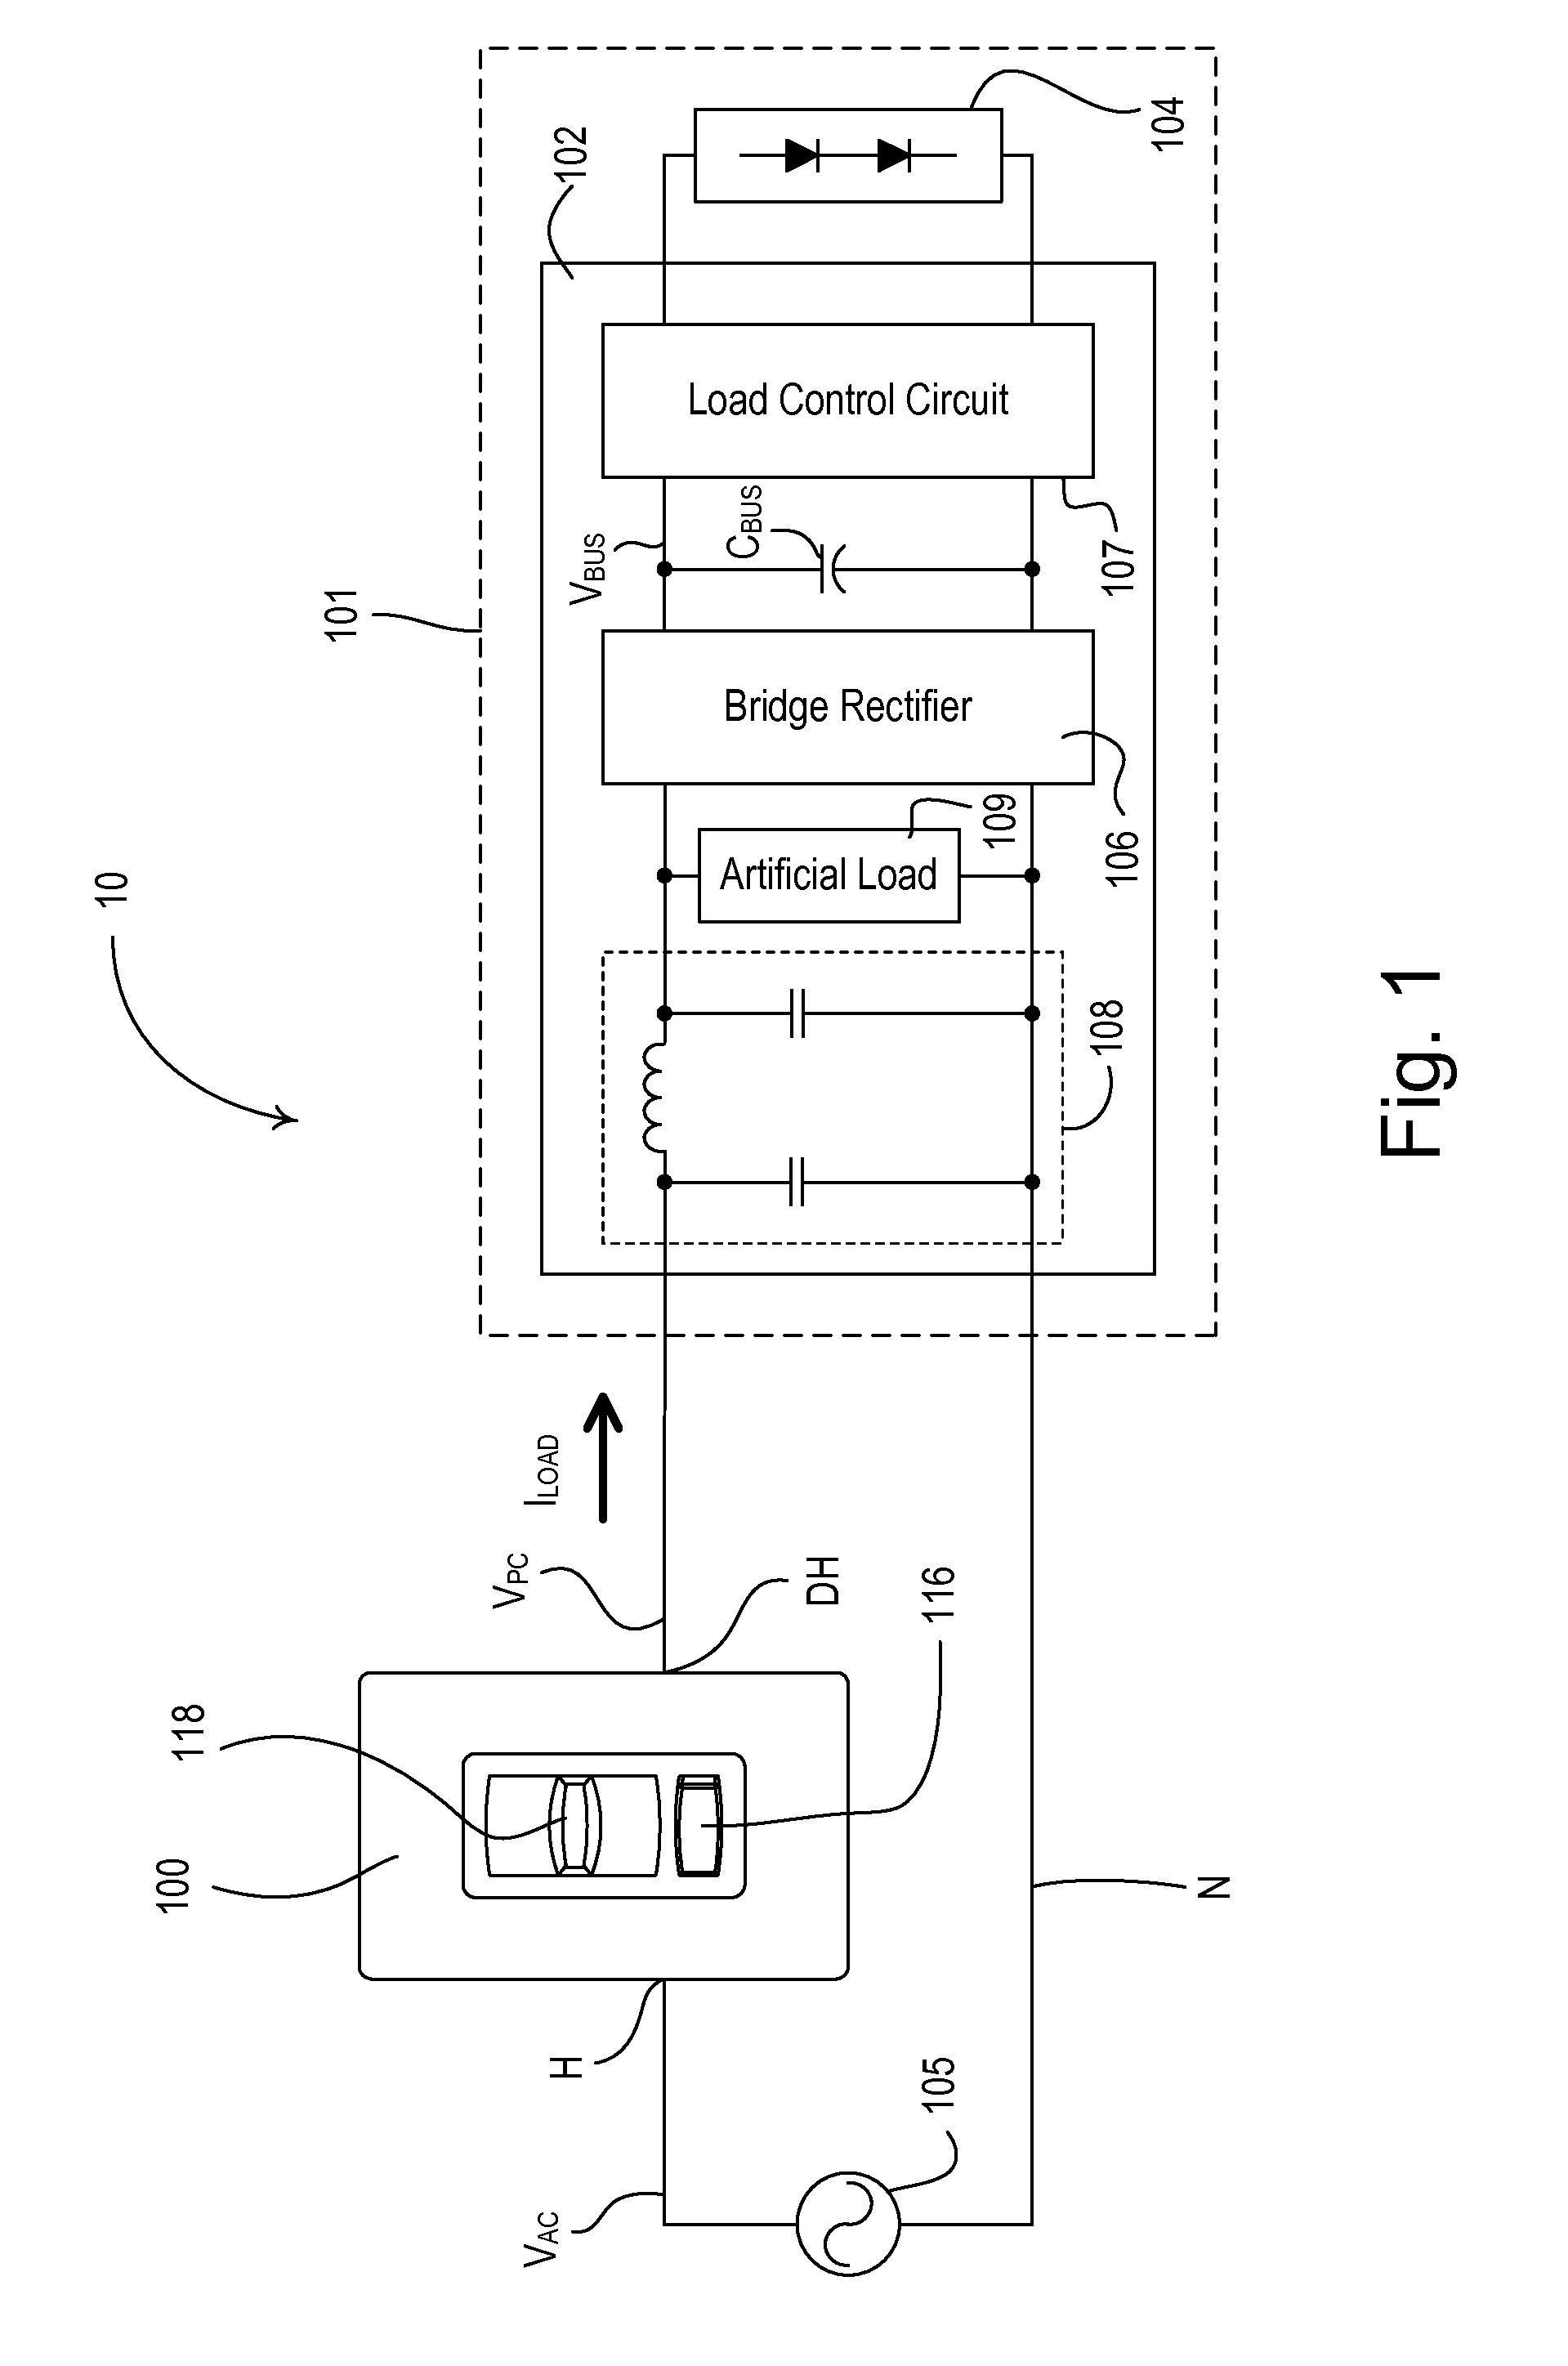 Two-wire dimmer switch for low-power loads